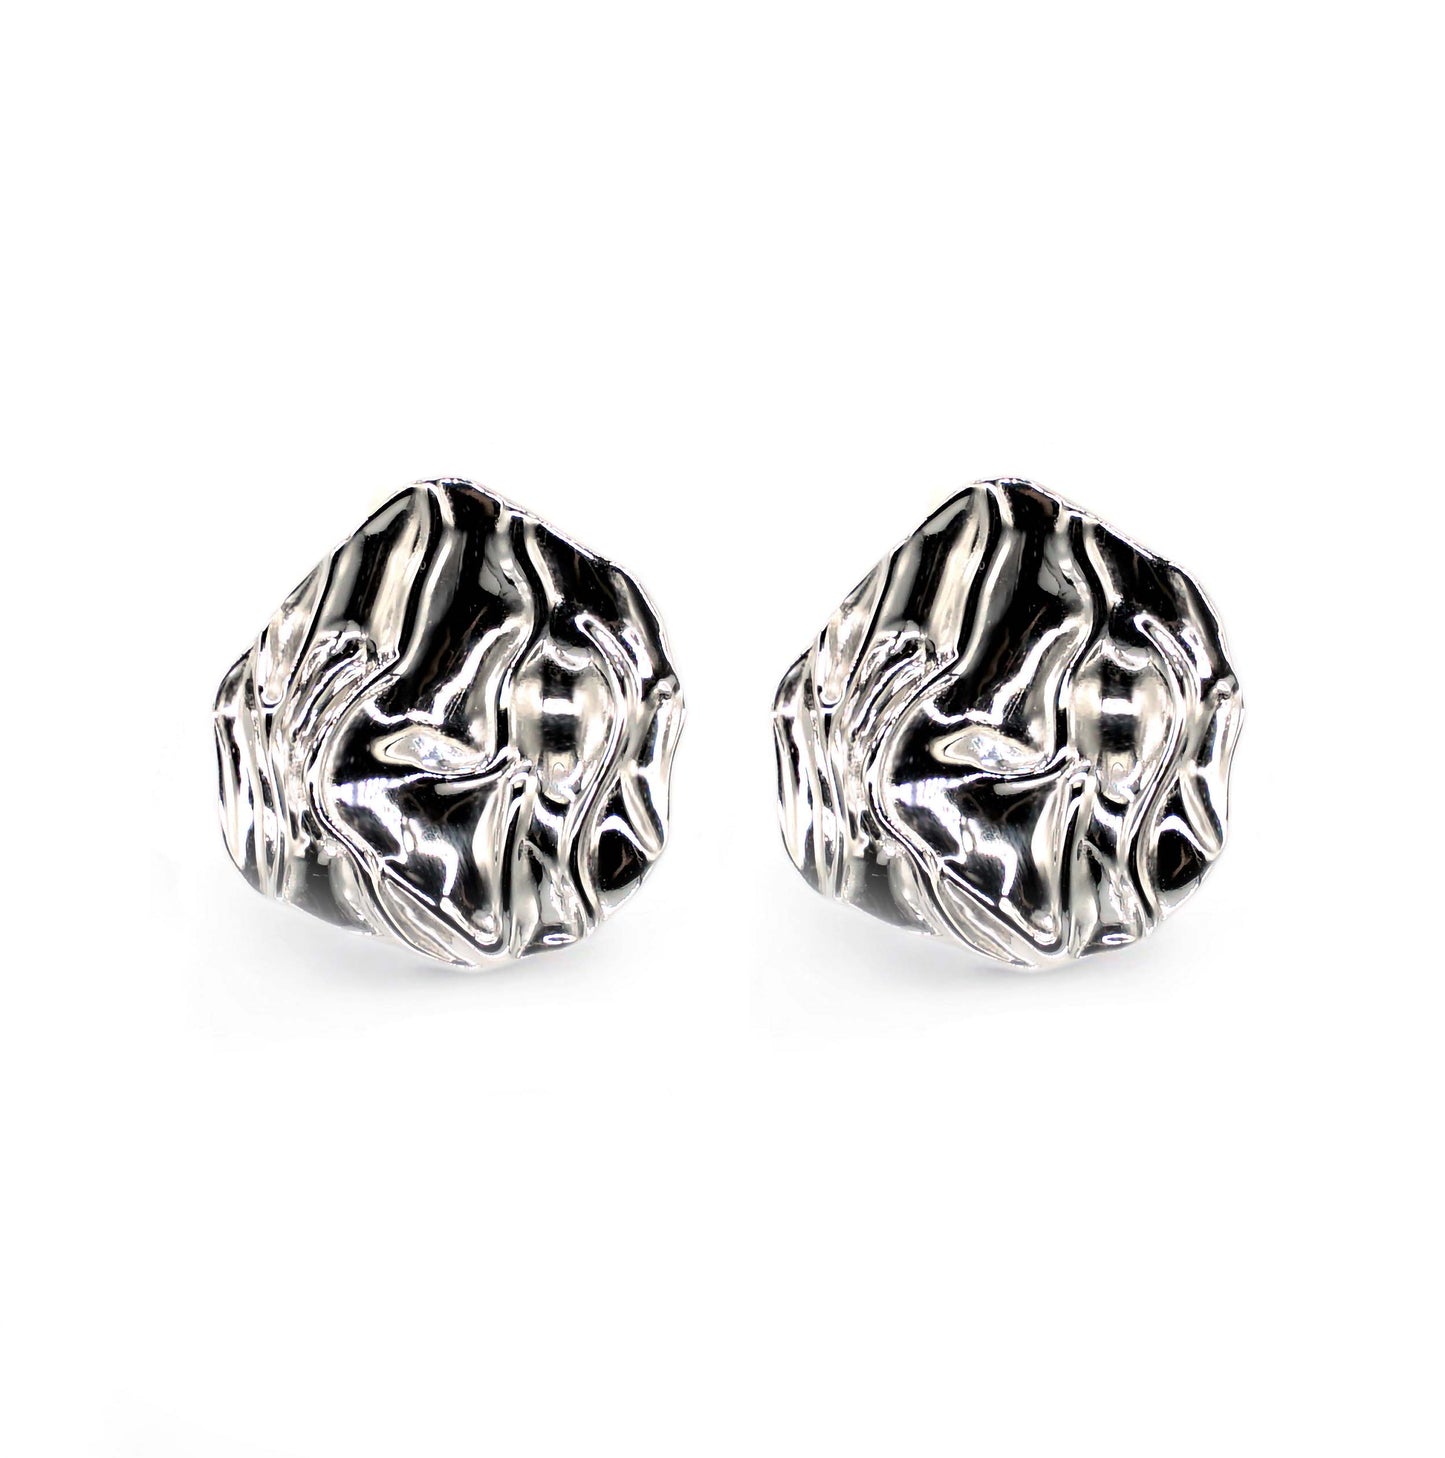 Explosion Earrings - Rhodium Plated Sterling Silver